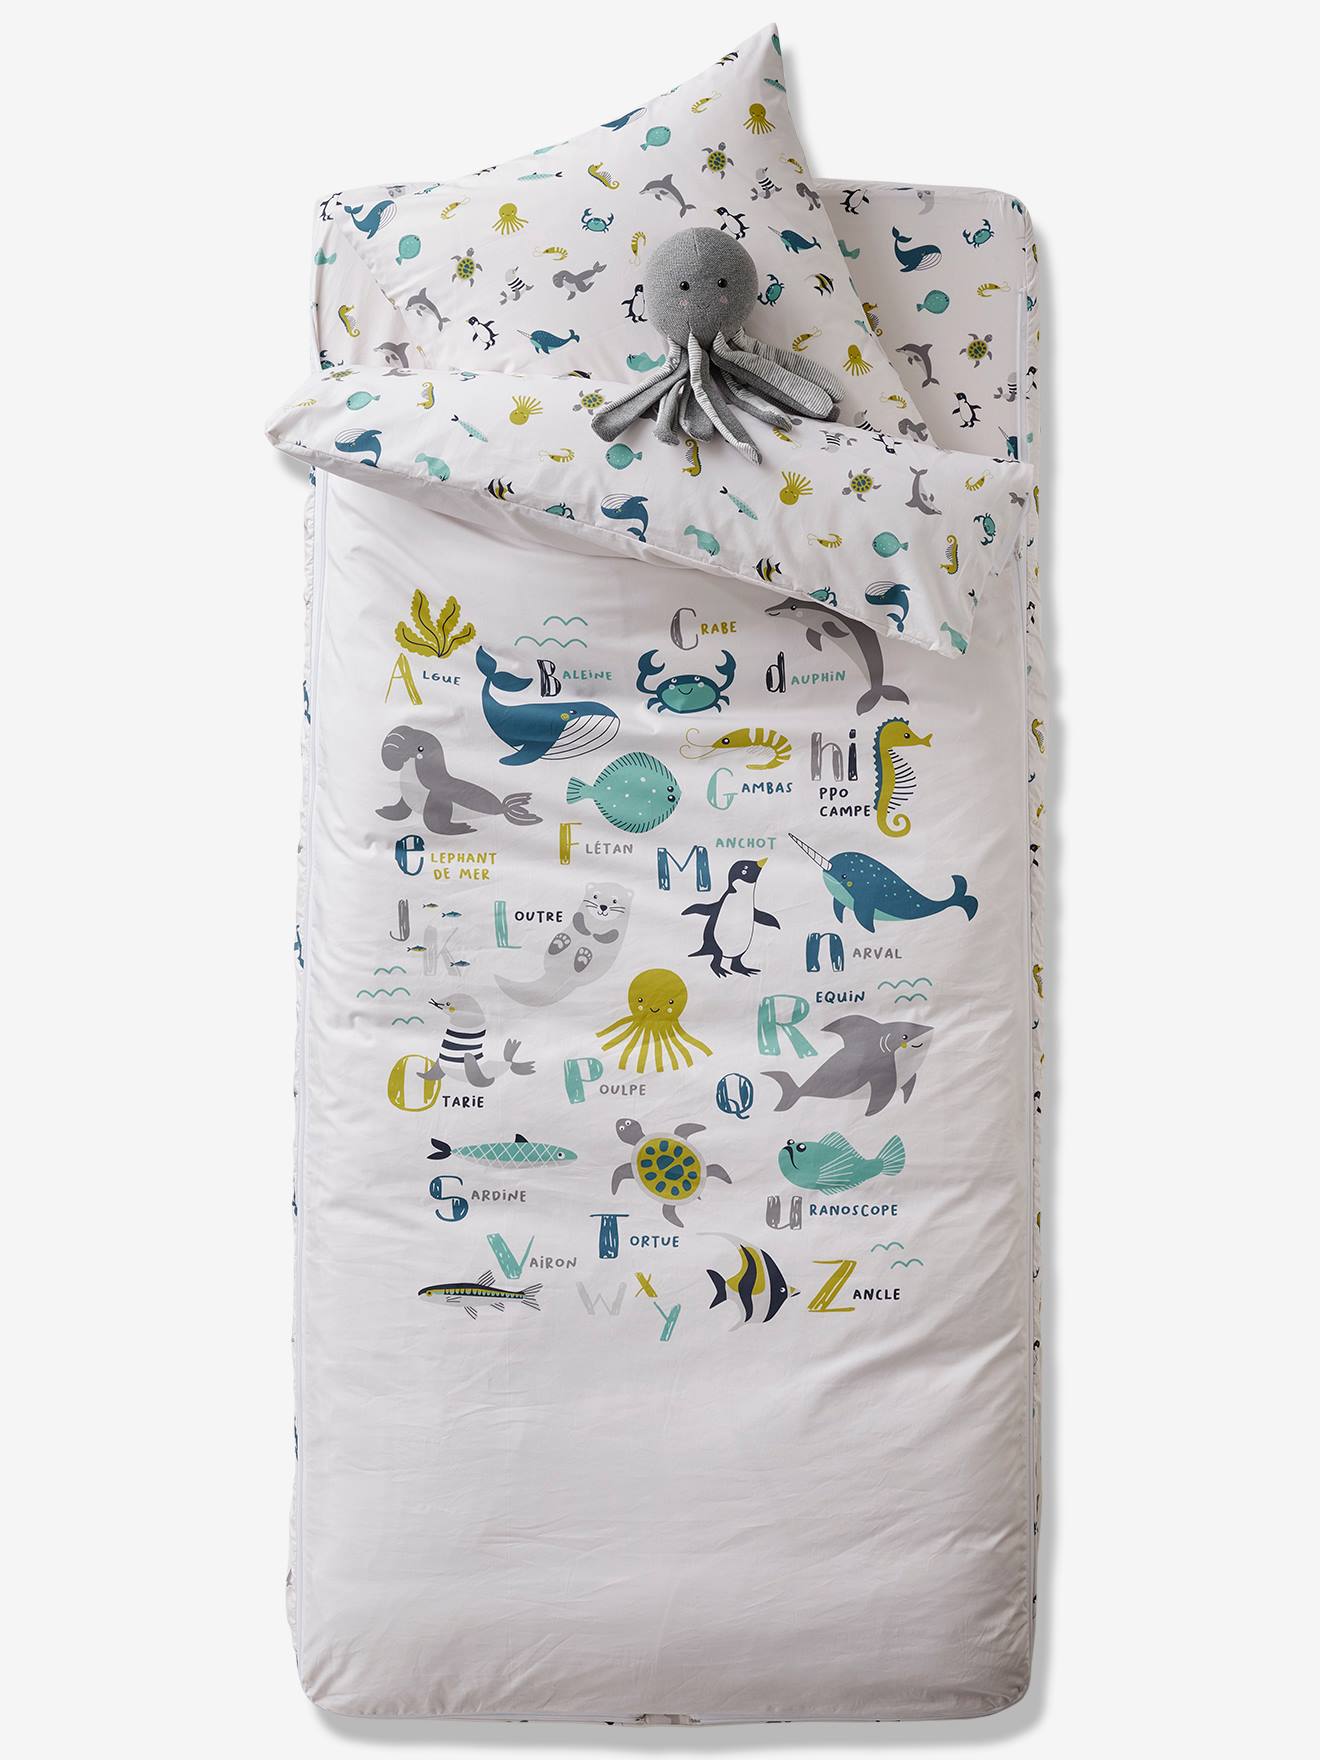 Easy to Tuck-in Ready-for-Bed Set with Duvet, ABECEDAIRE MARIN white